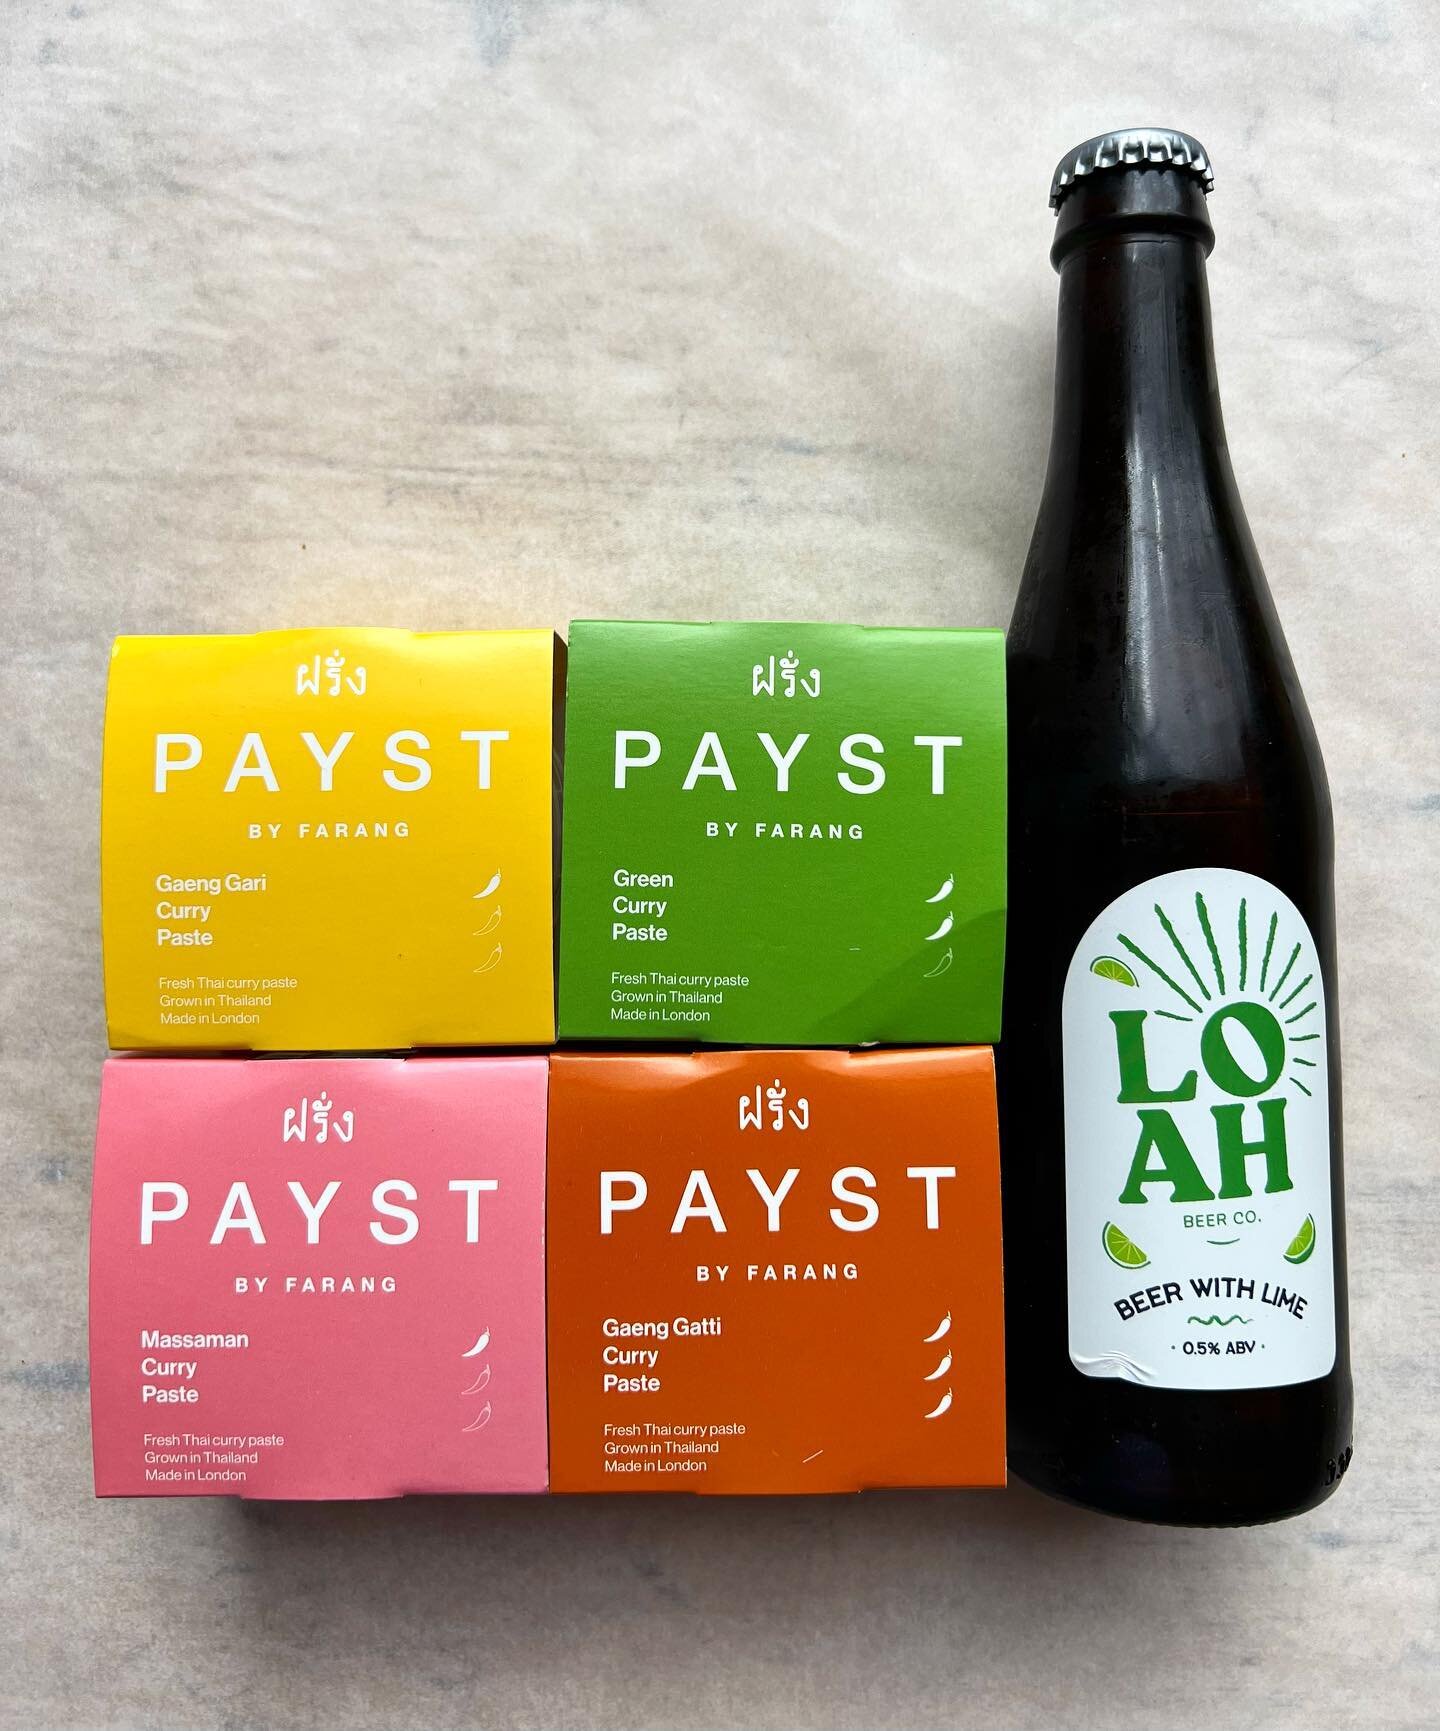 @paystltd takes all the work out of making a delicious curry. Takes no time at all and is soooo good. We ❤️ @loah.beer with it for the midweek win! #midweekmeals #curry #nonalcoholicbeer #lazymeals